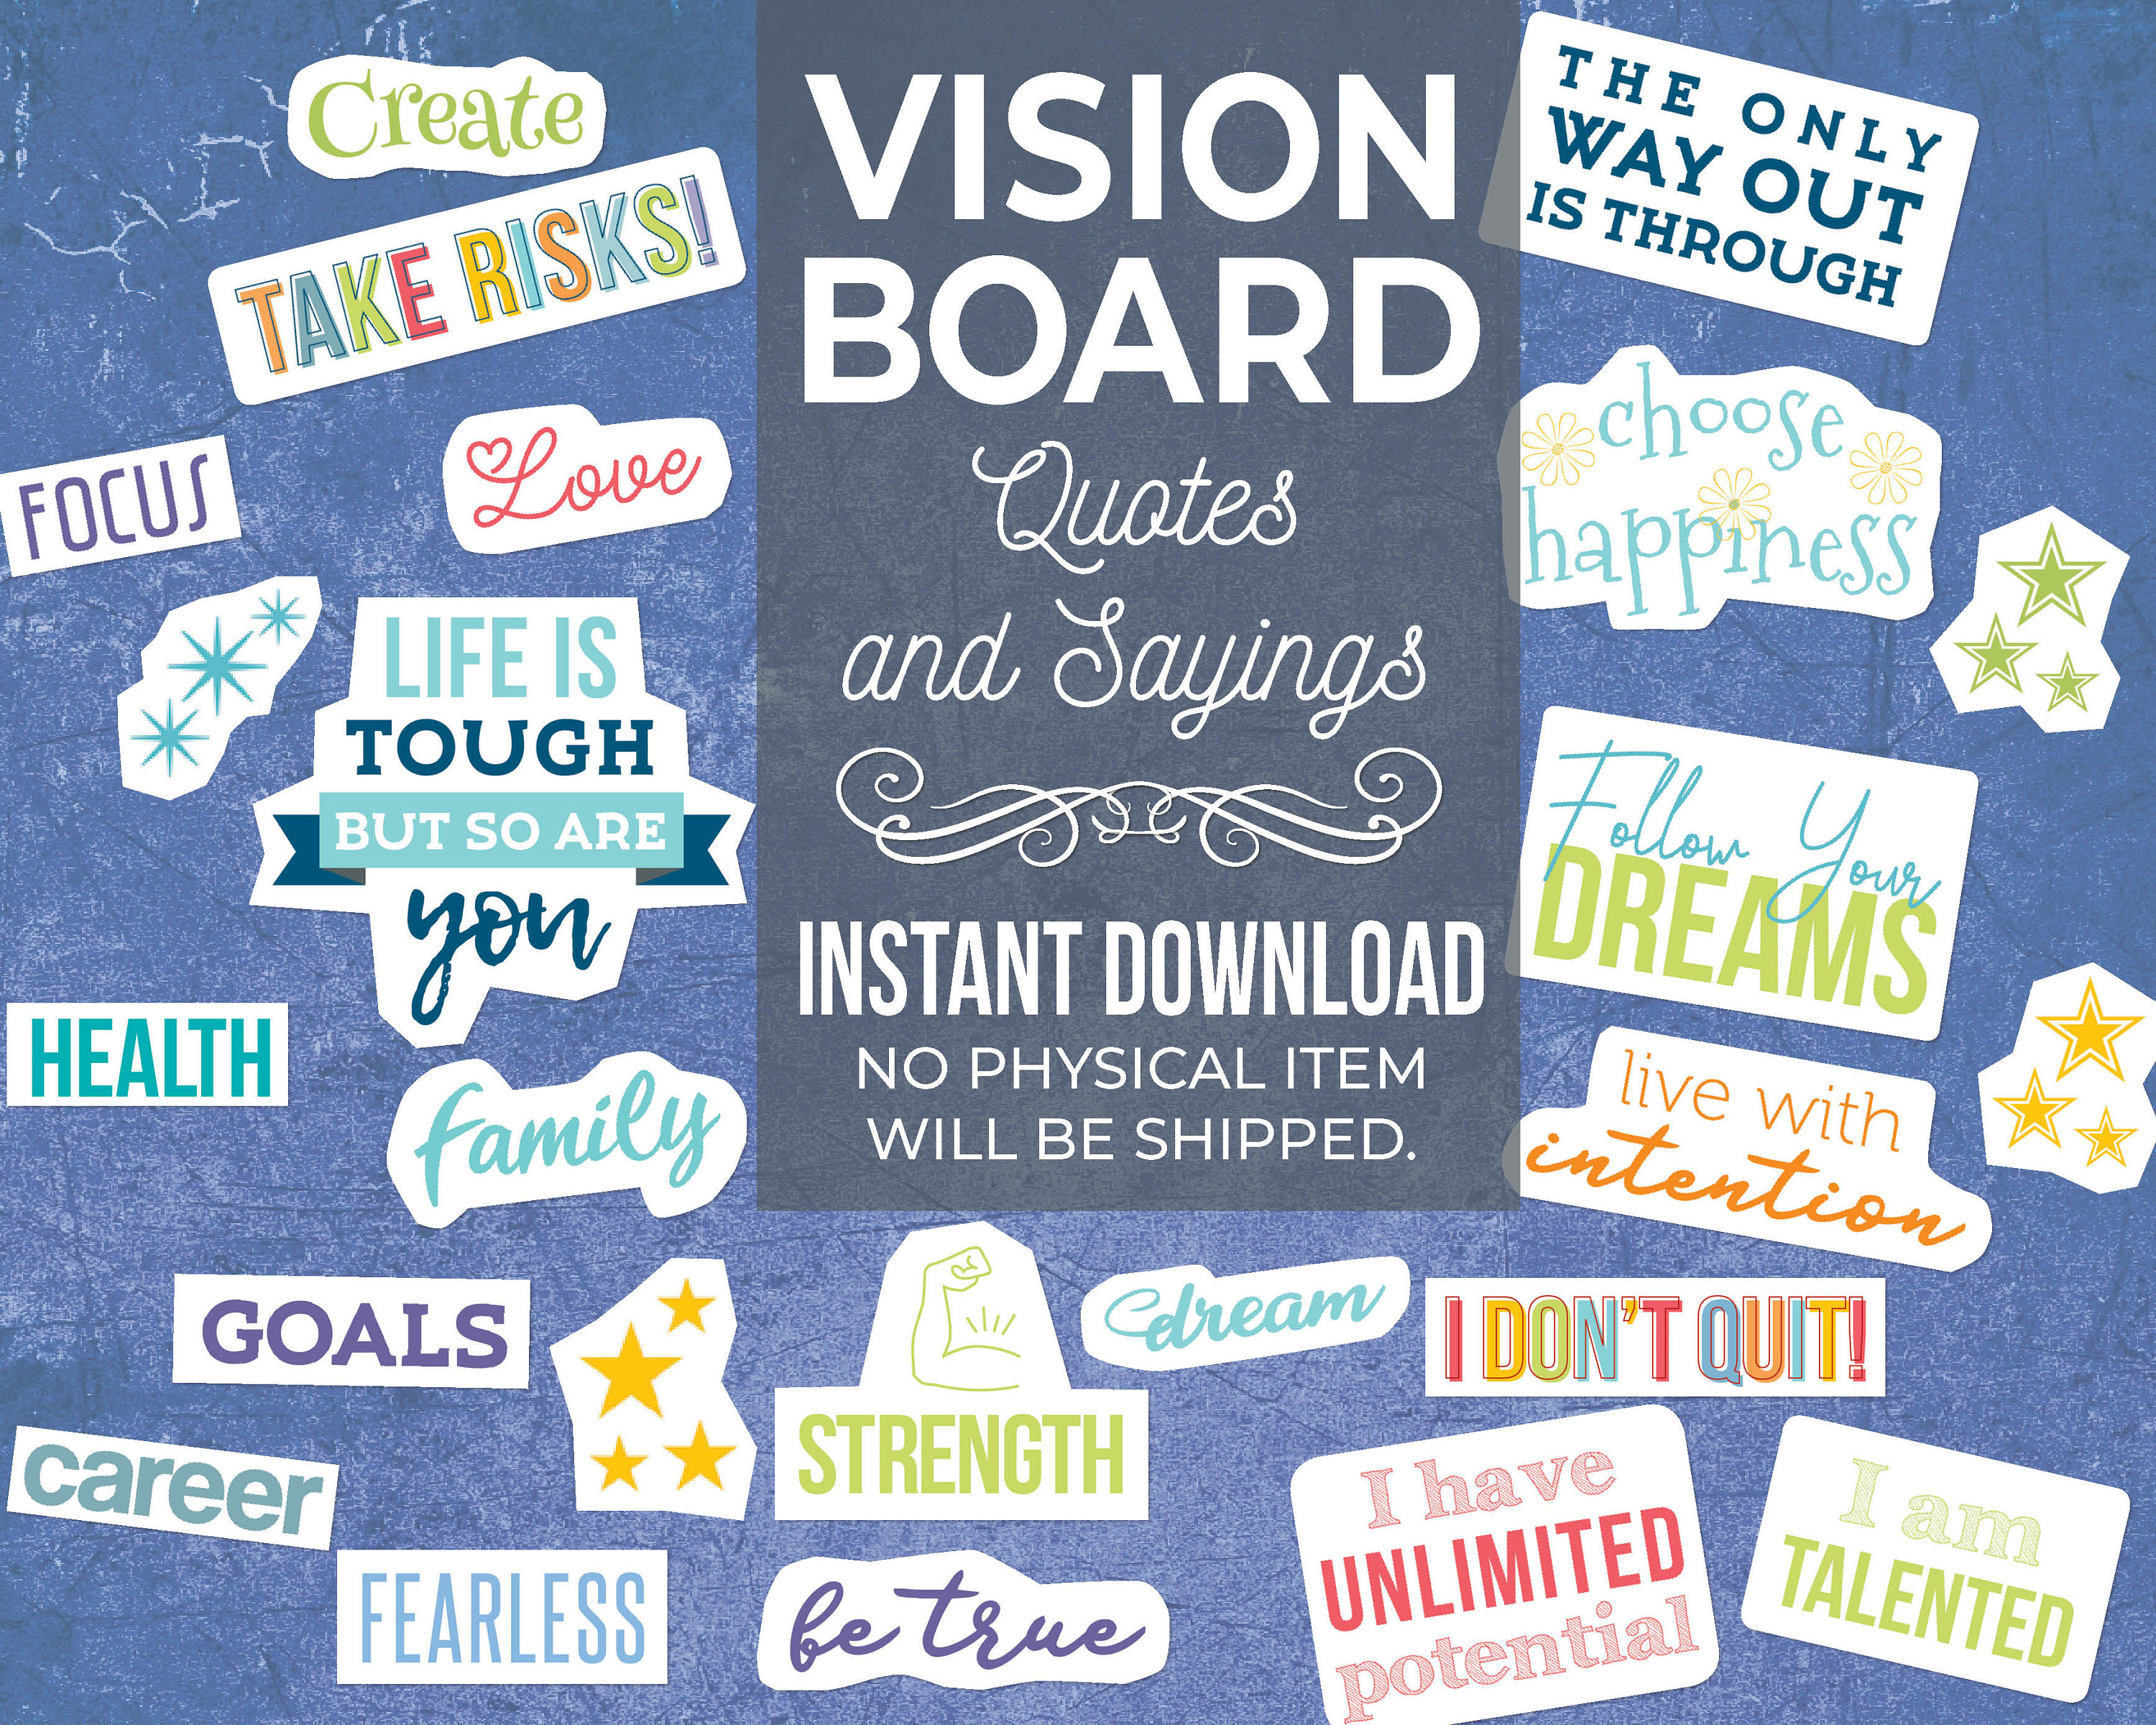 2024 Vision Board Clip Art Book For Black Women: An Extensive Beautiful  Collection of Inspiring Images, Quotes & Affirmations for Personal Growth